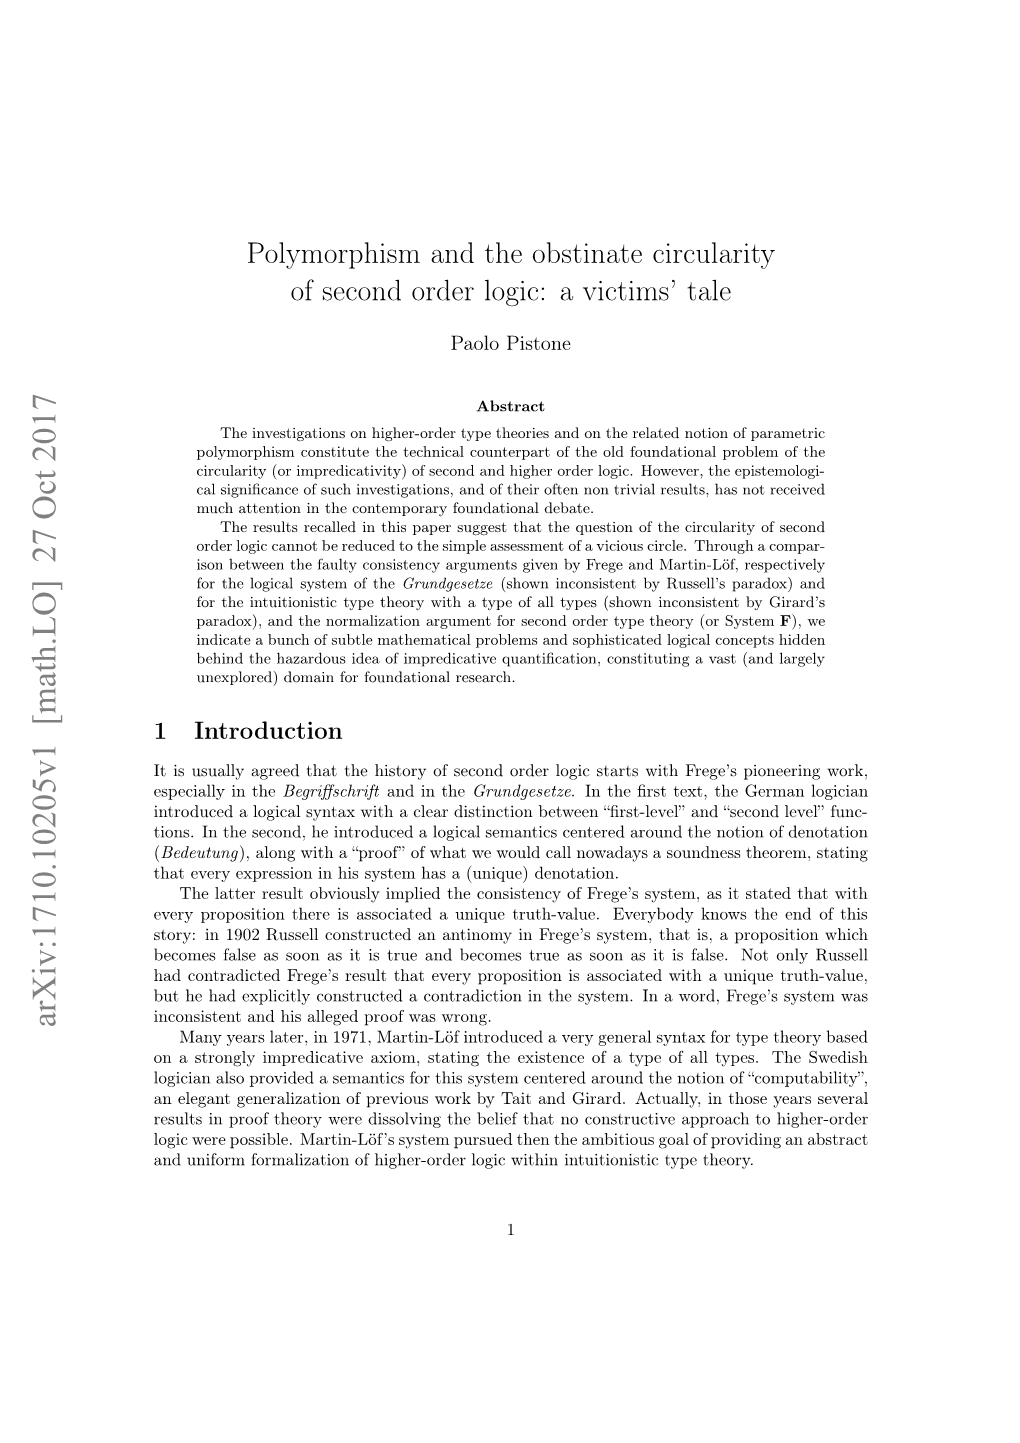 Polymorphism and the Obstinate Circularity of Second Order Logic